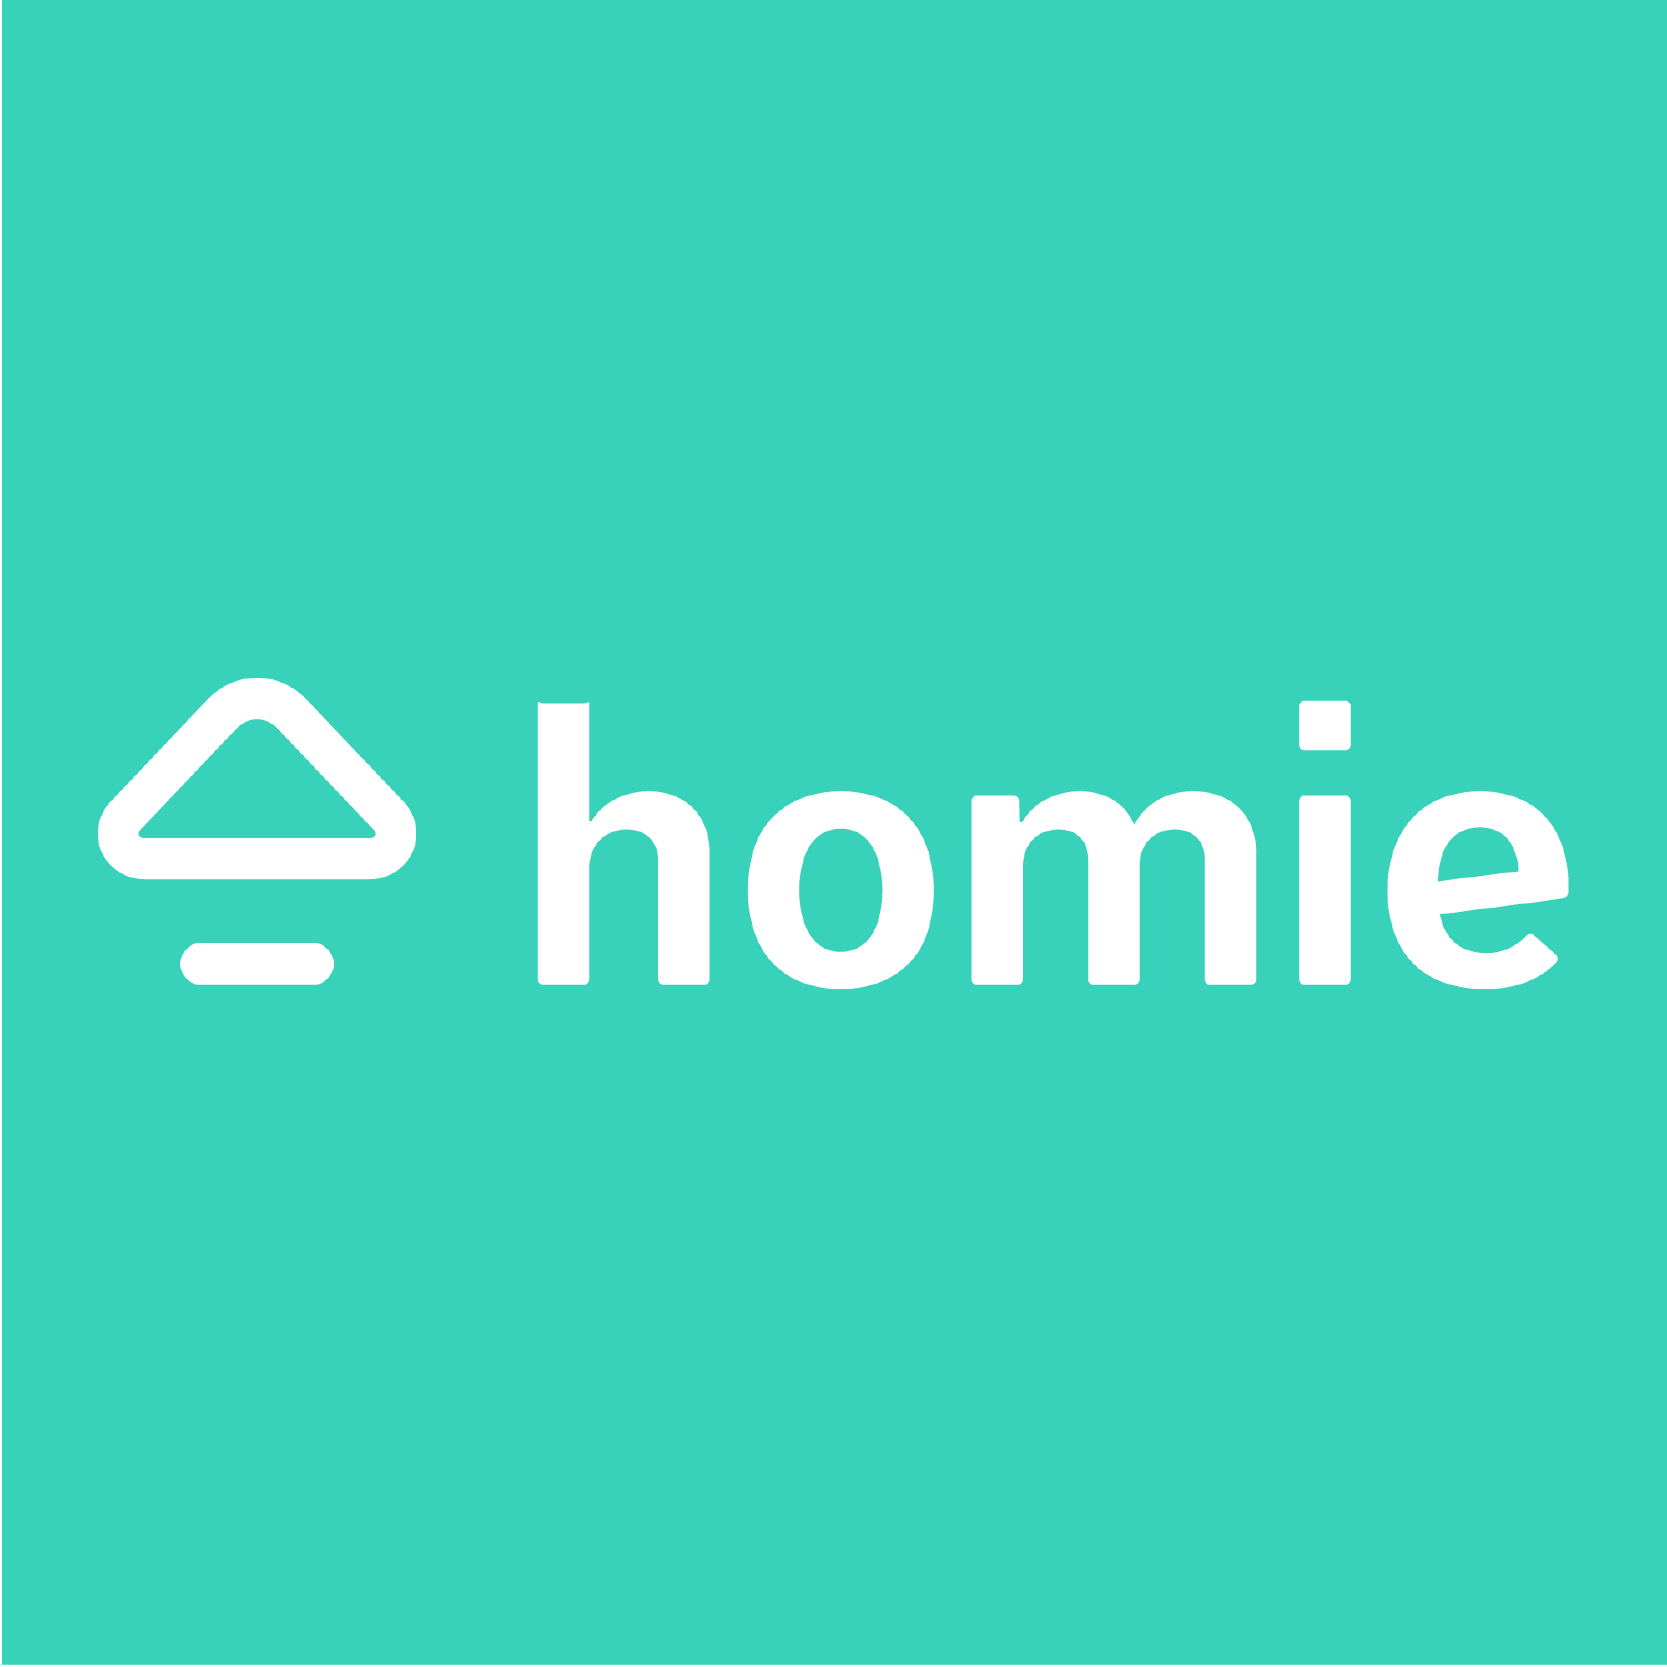 Homie And KSL Homes Announce New Partnership